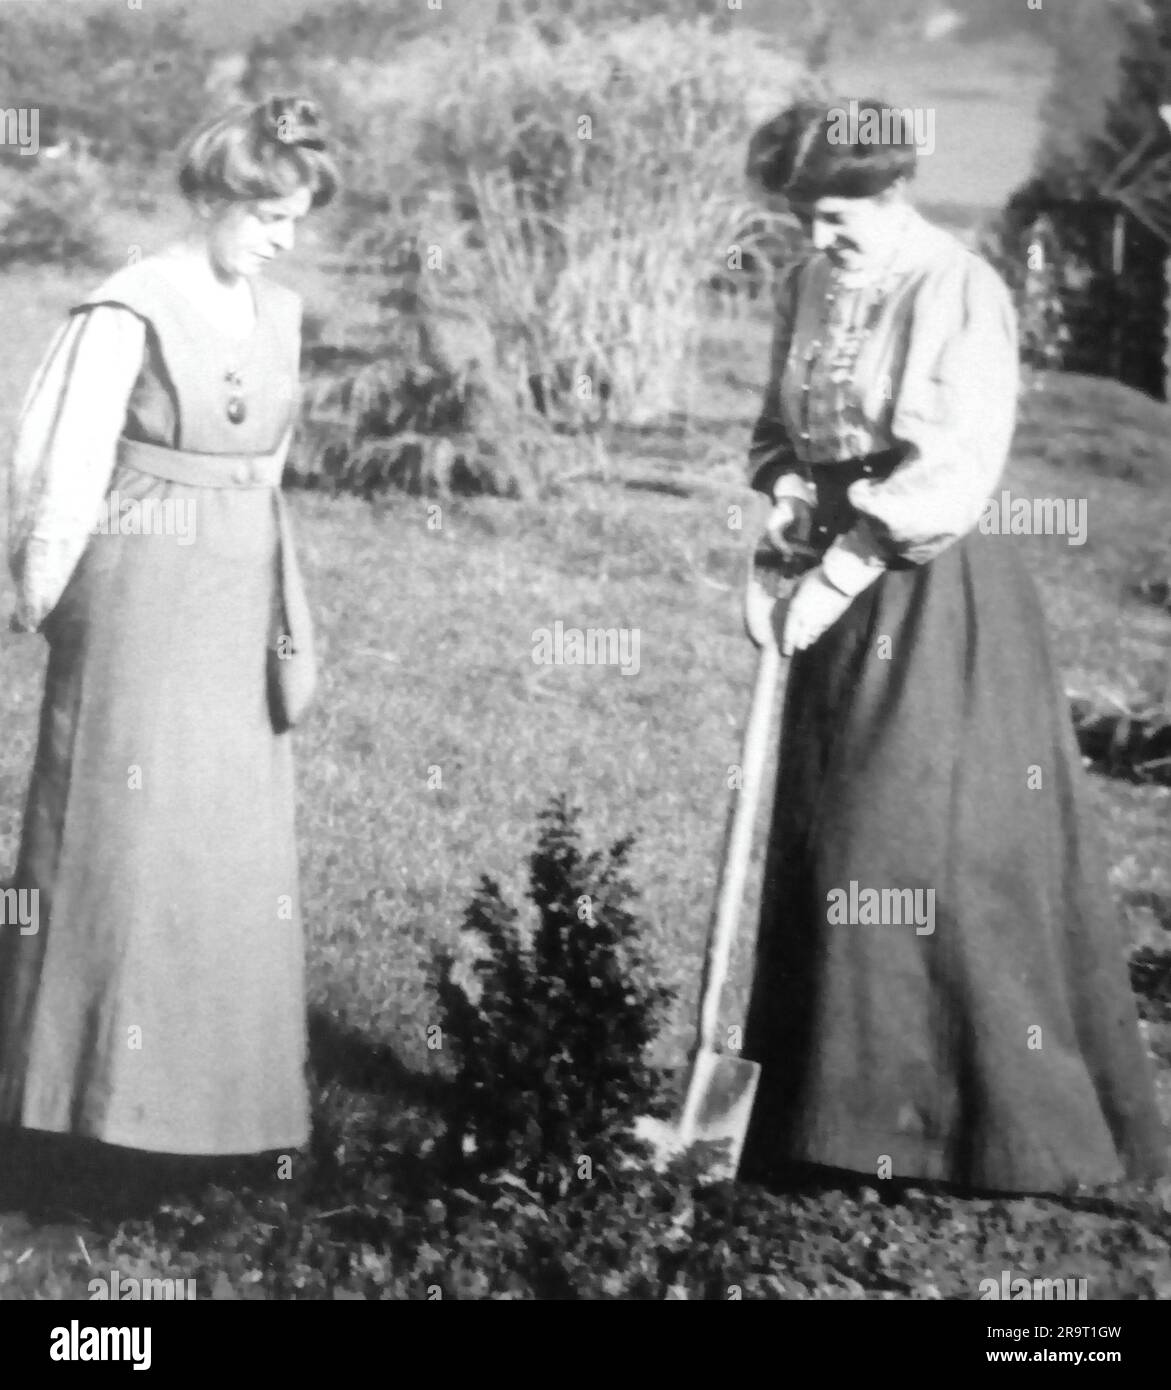 Annie Kenney and Theresa Garnett. From a unique collection of glass plate negatives taken by Col. Linley Blathwayt of Eagle House, Batheaston, home of refuge for suffragettes between 1908 and 1912. Stock Photo